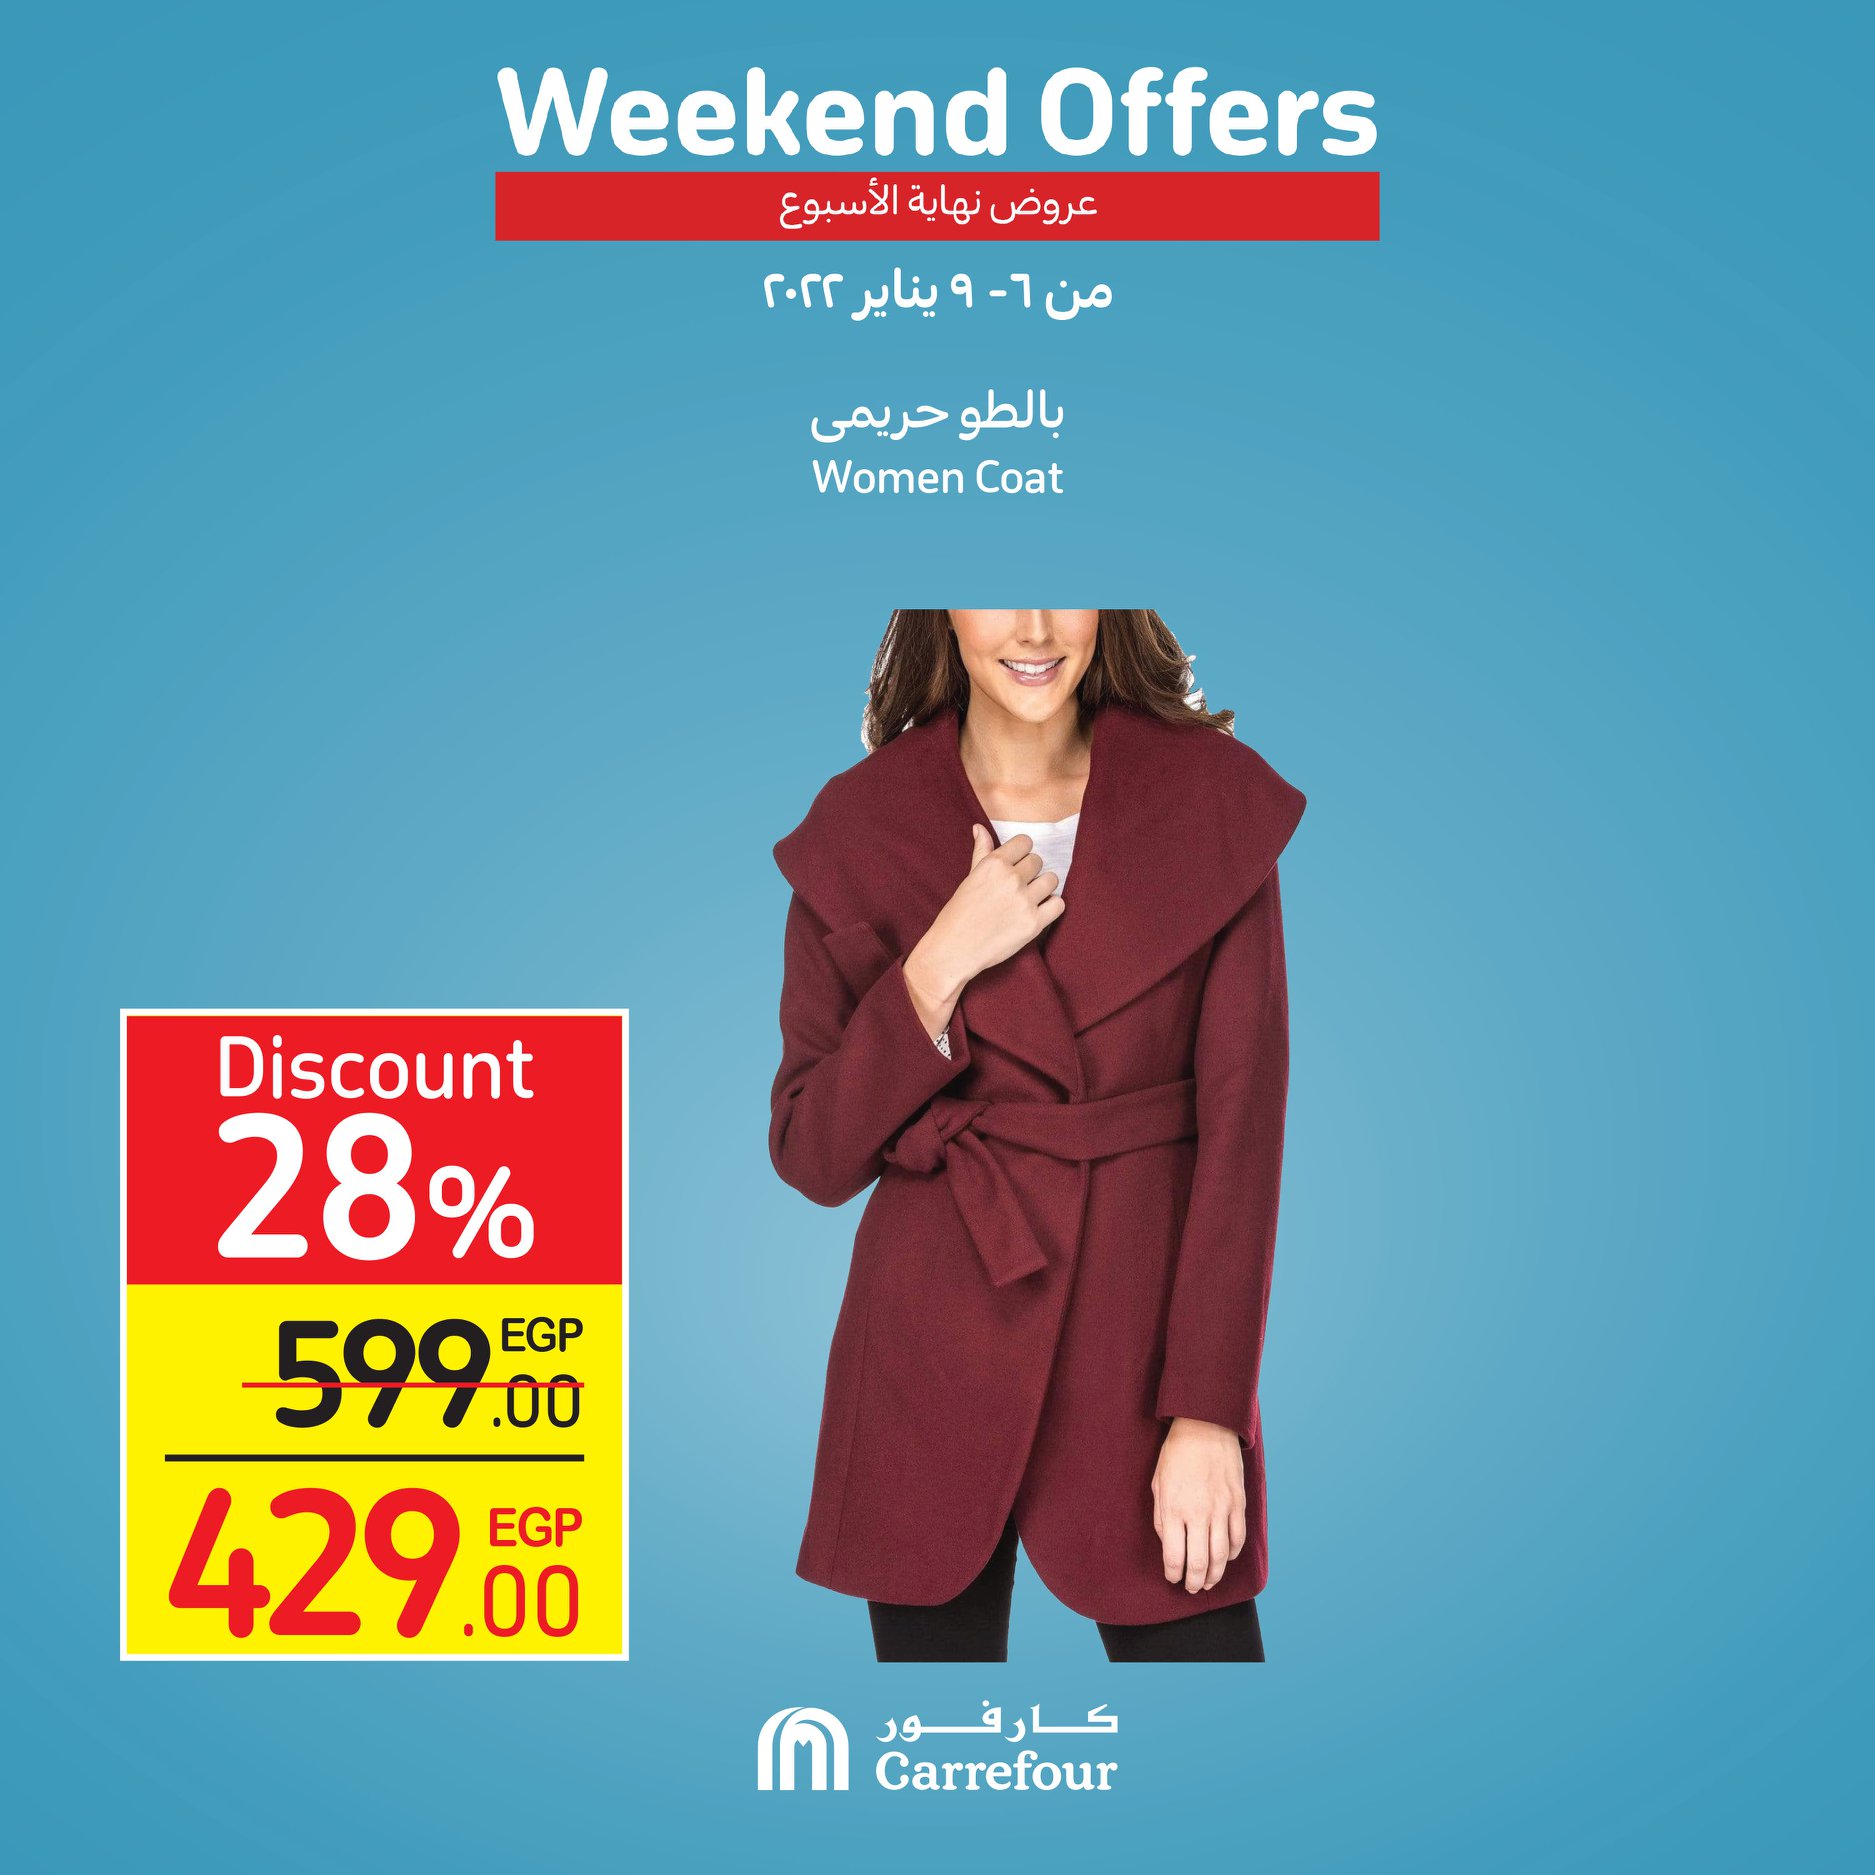 Now, the strongest offers and surprises from Carrefour, half-price discounts, at Weekend until January 16th, 45